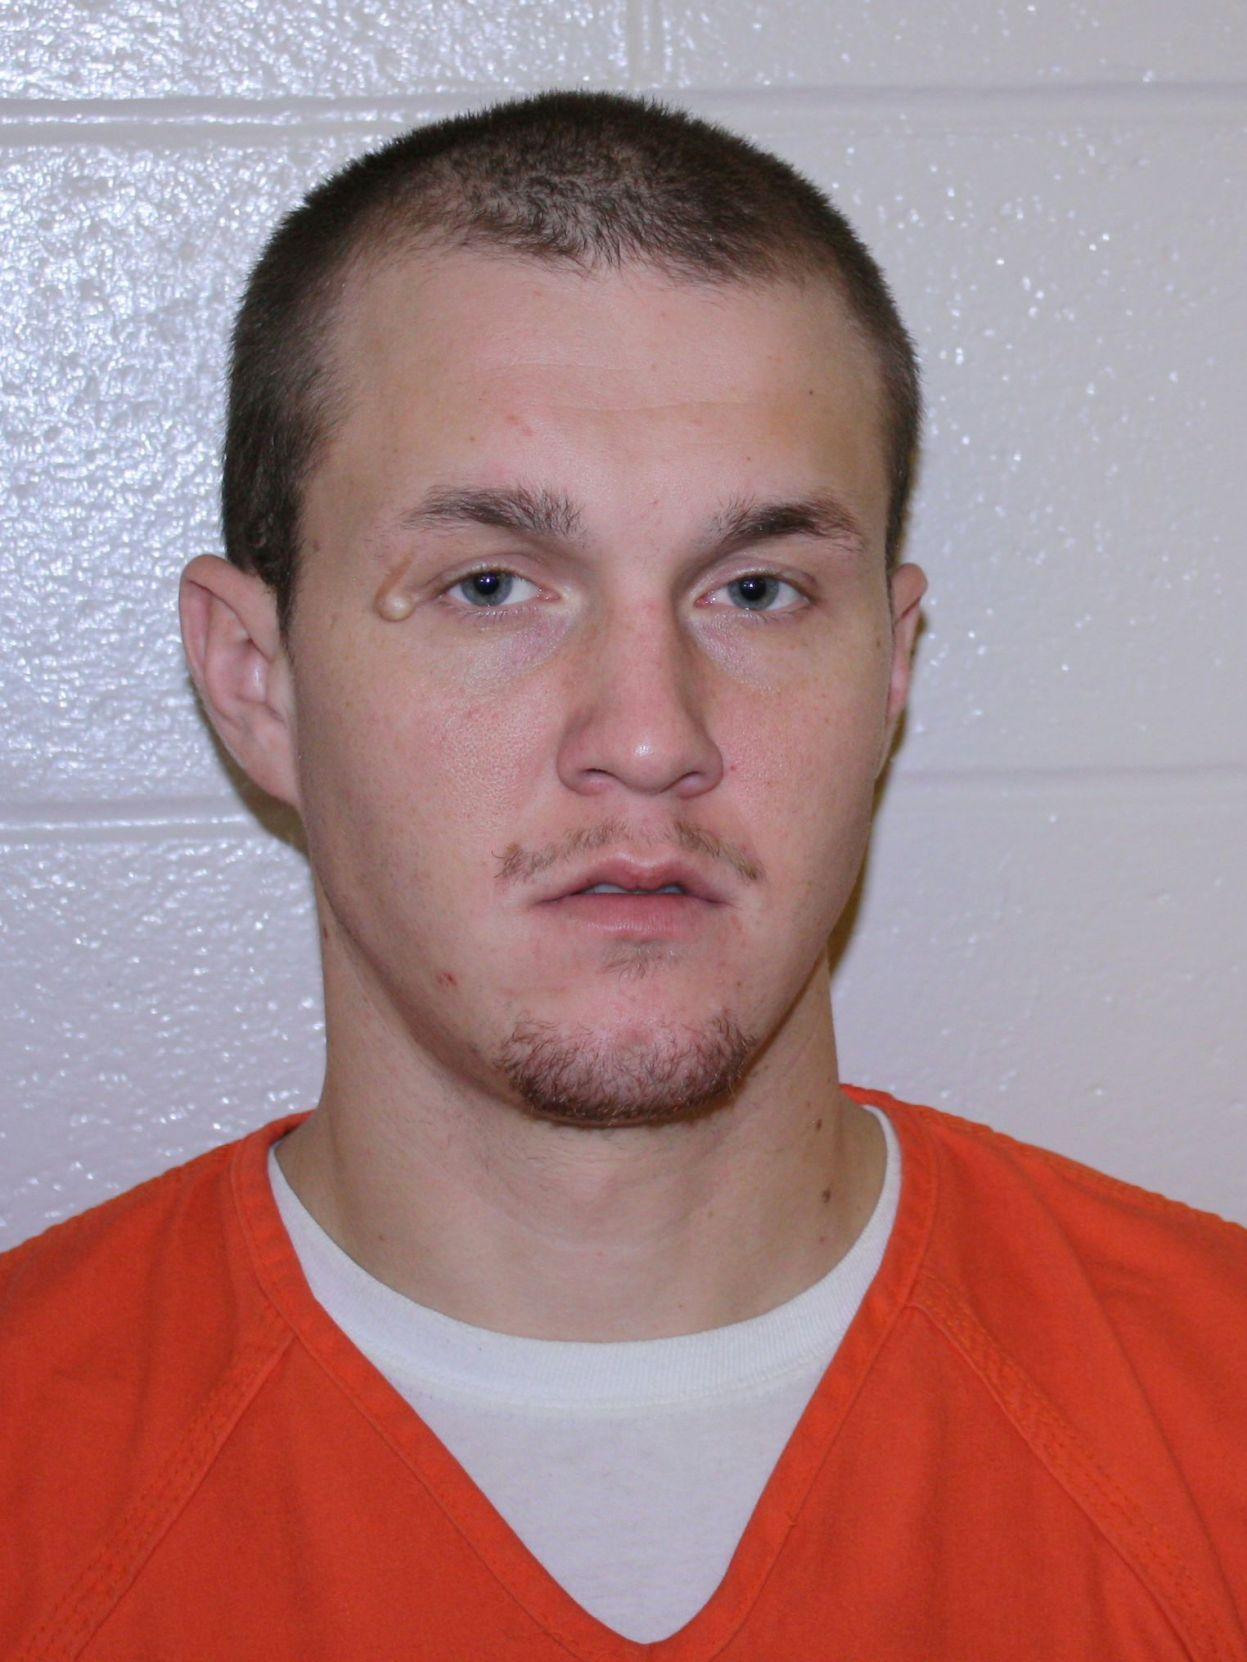 Floyd County Jail inmate charged with sexual battery, indecency against